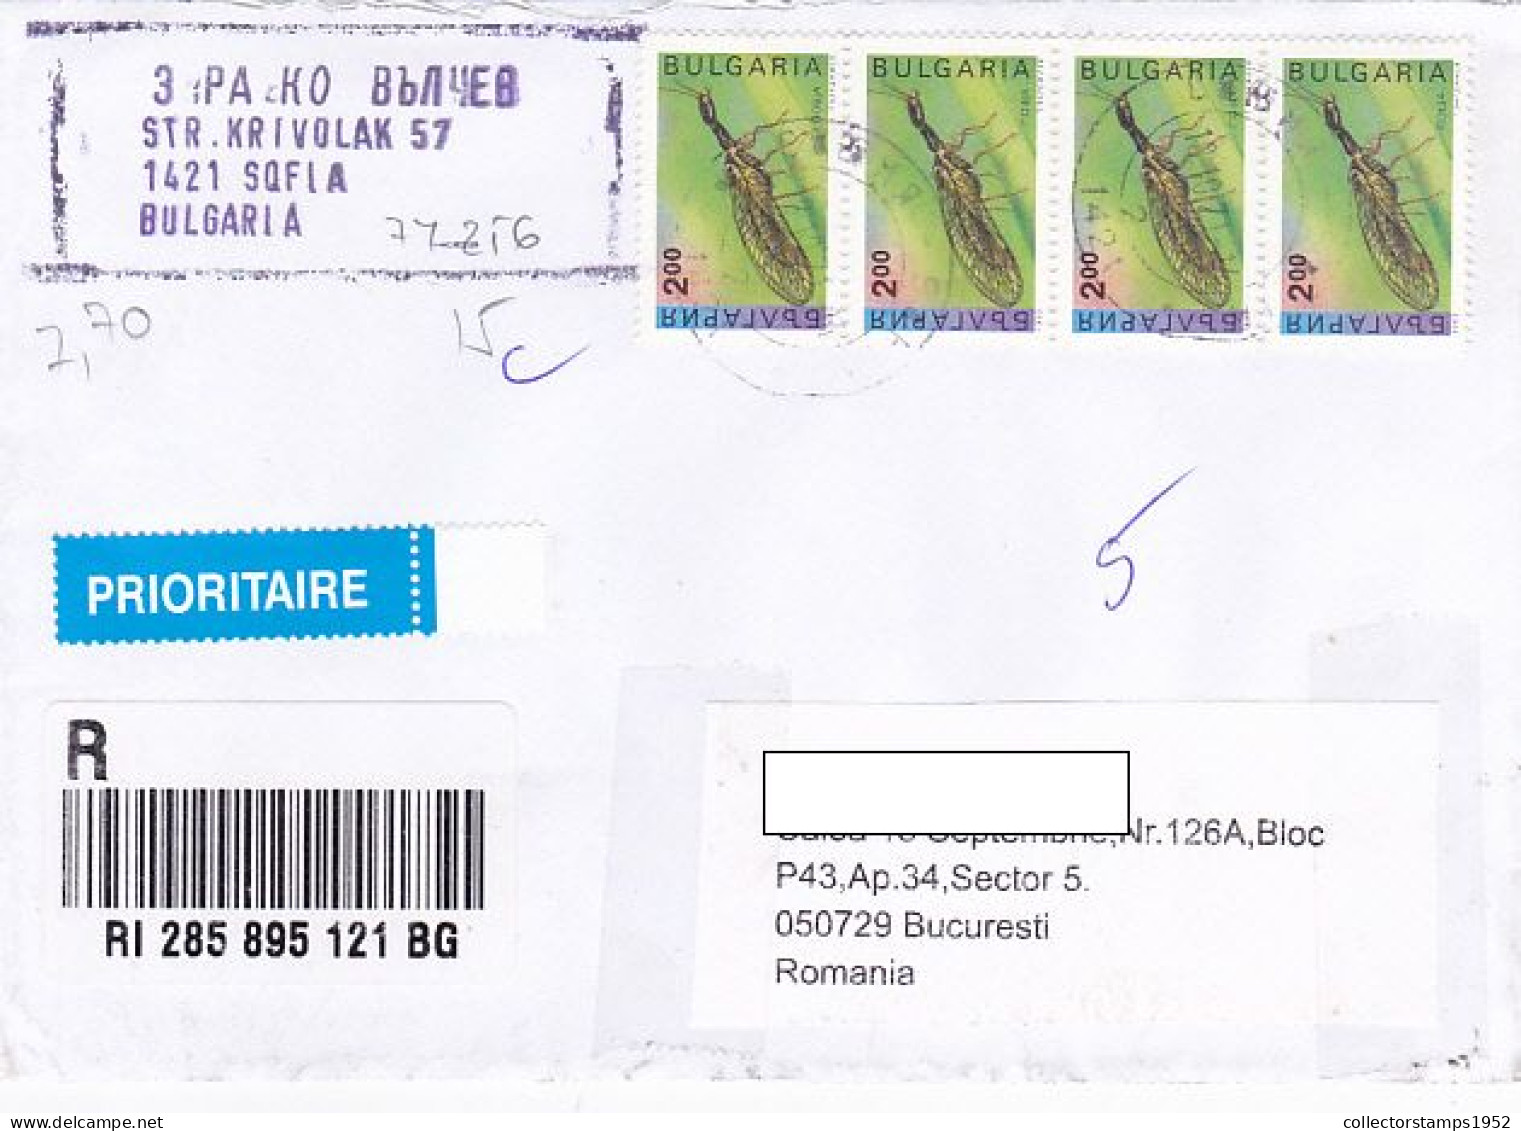 INSECTS, FINE STAMPS ON REGISTERED COVER, 2021, BULGARIA - Covers & Documents